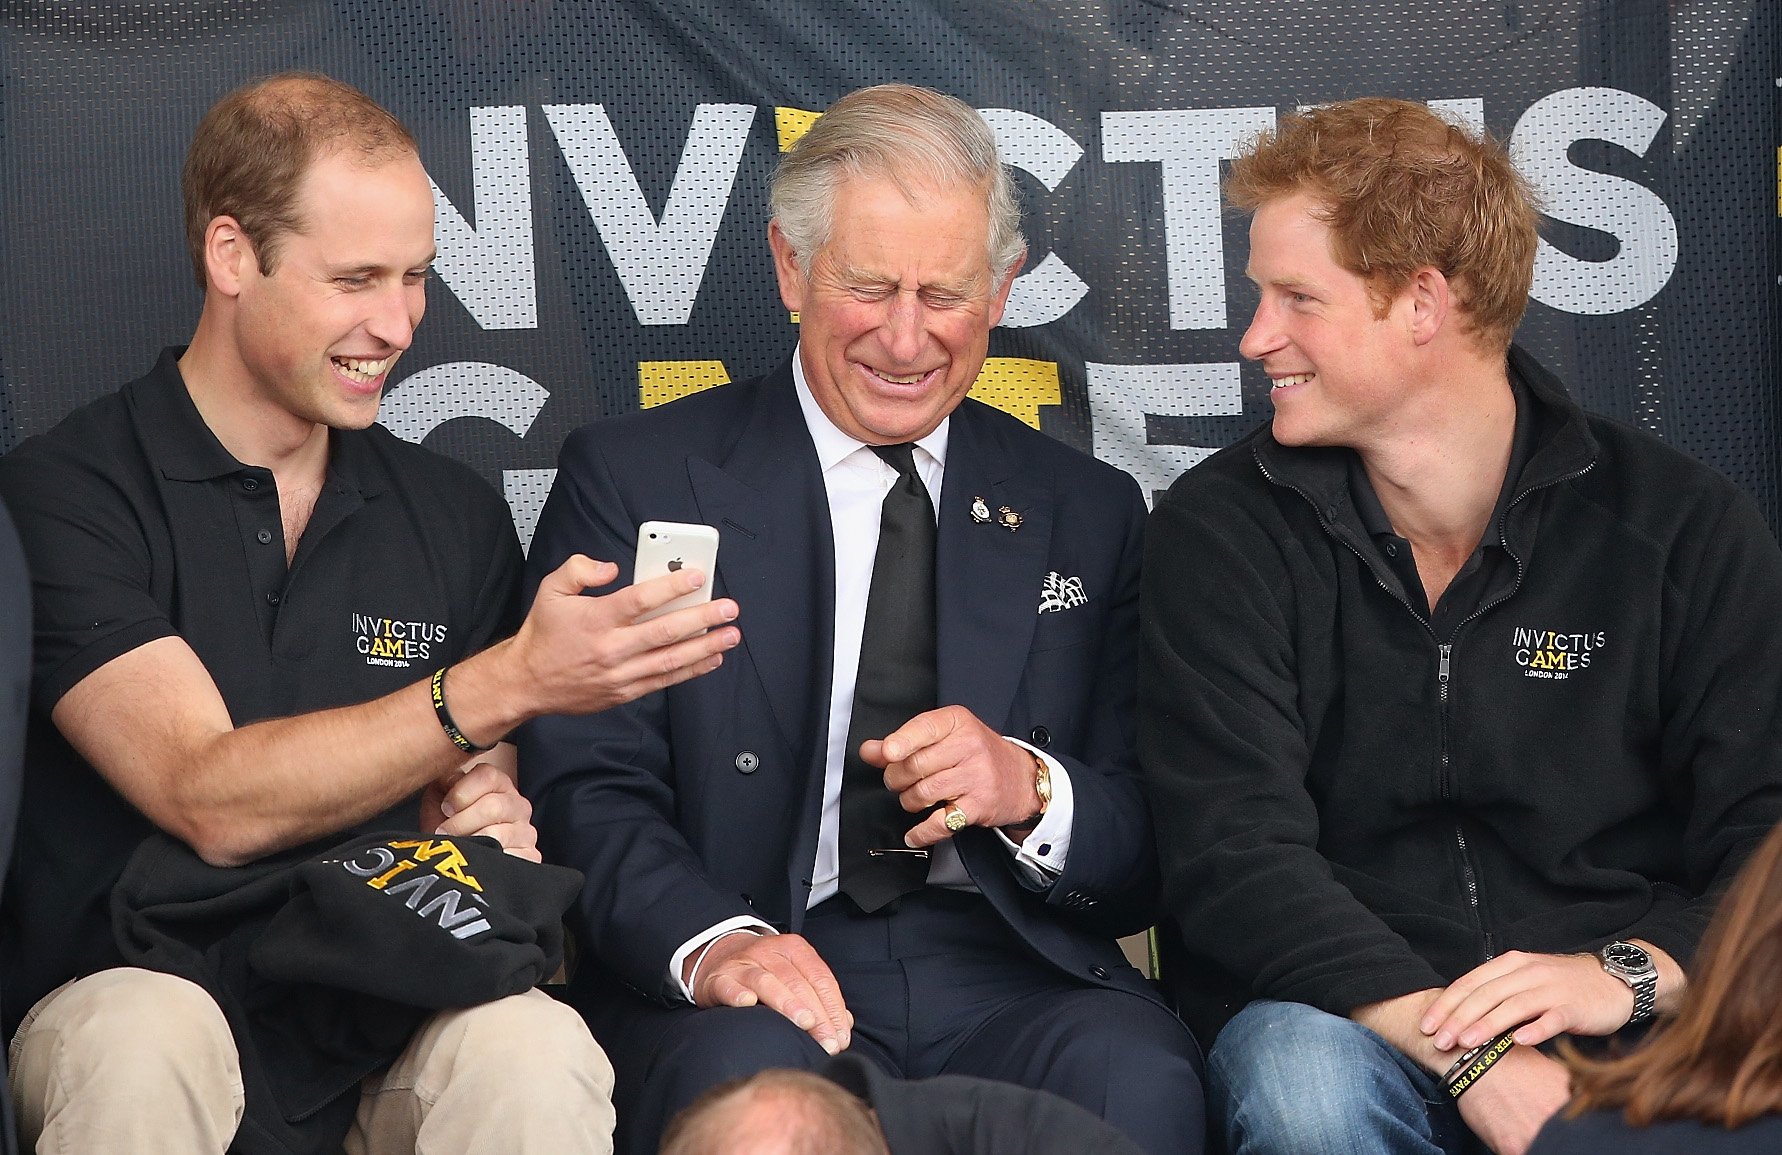 Prince William, King Charles III and Prince Harry in London 2014. | Source: Getty Images 